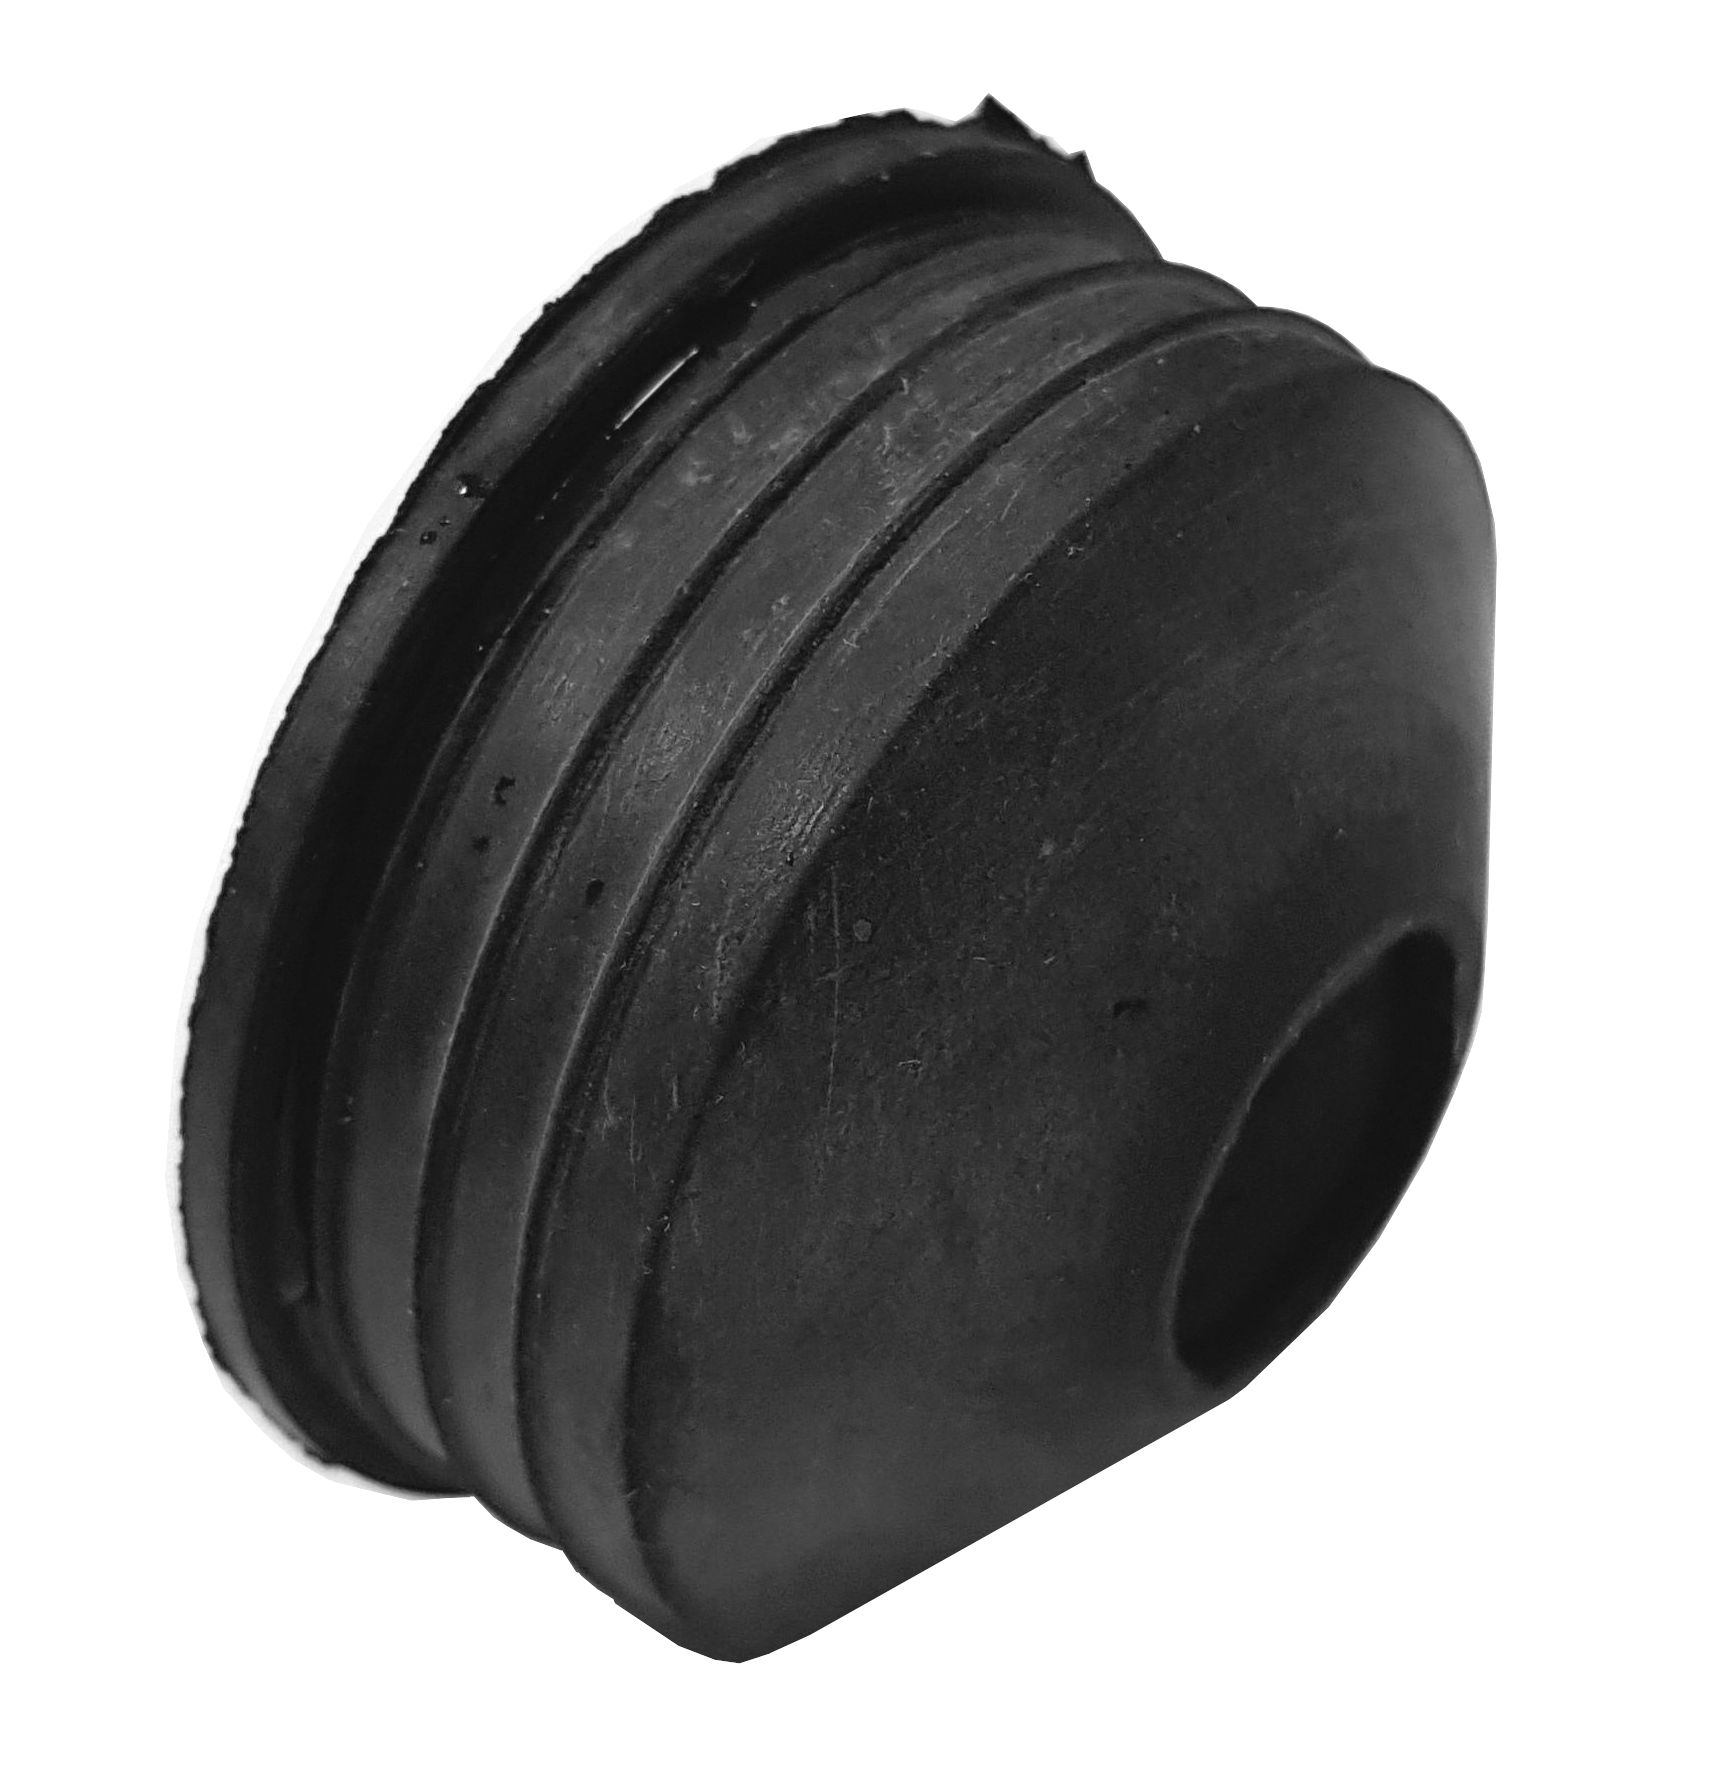 Elastomer ring for multi-material elbow connection: 50x1".